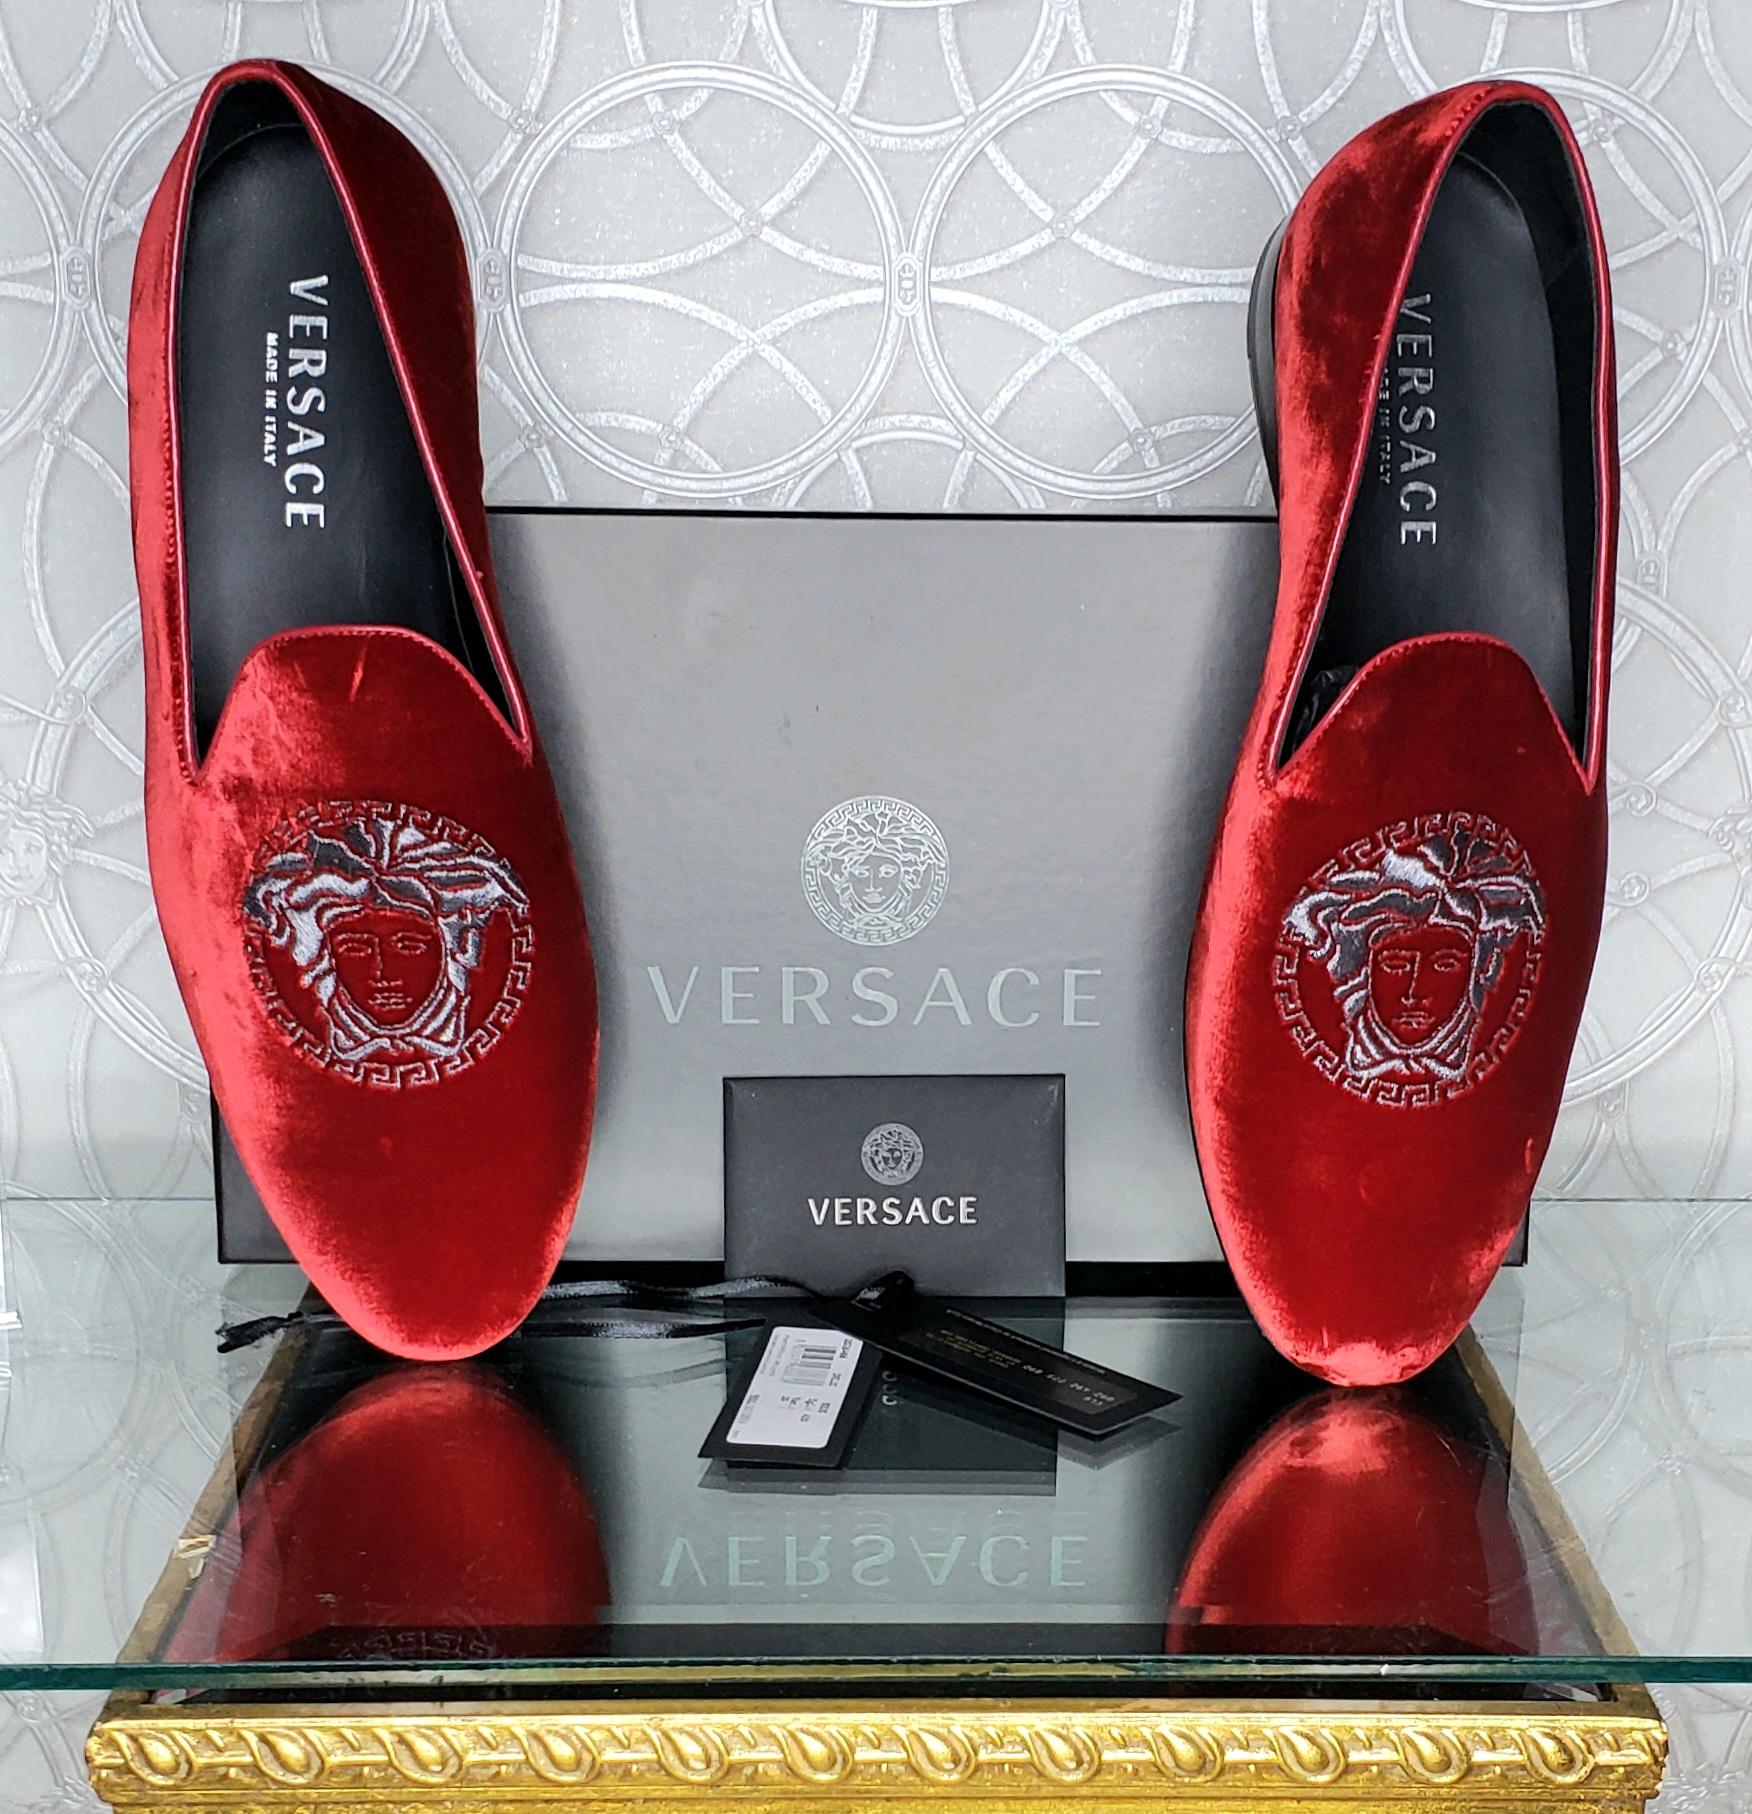 VERSACE

Red City Loafer Shoe

Exclusive red/silver colorway
Stacked heel
Almond toe
Slip-on style

Content: Leather/polyester/cotton upper
Lining: 100% leather

Made in Italy

available in sizes:
Size IT42.5 - US 9.5 insole 10 7/8